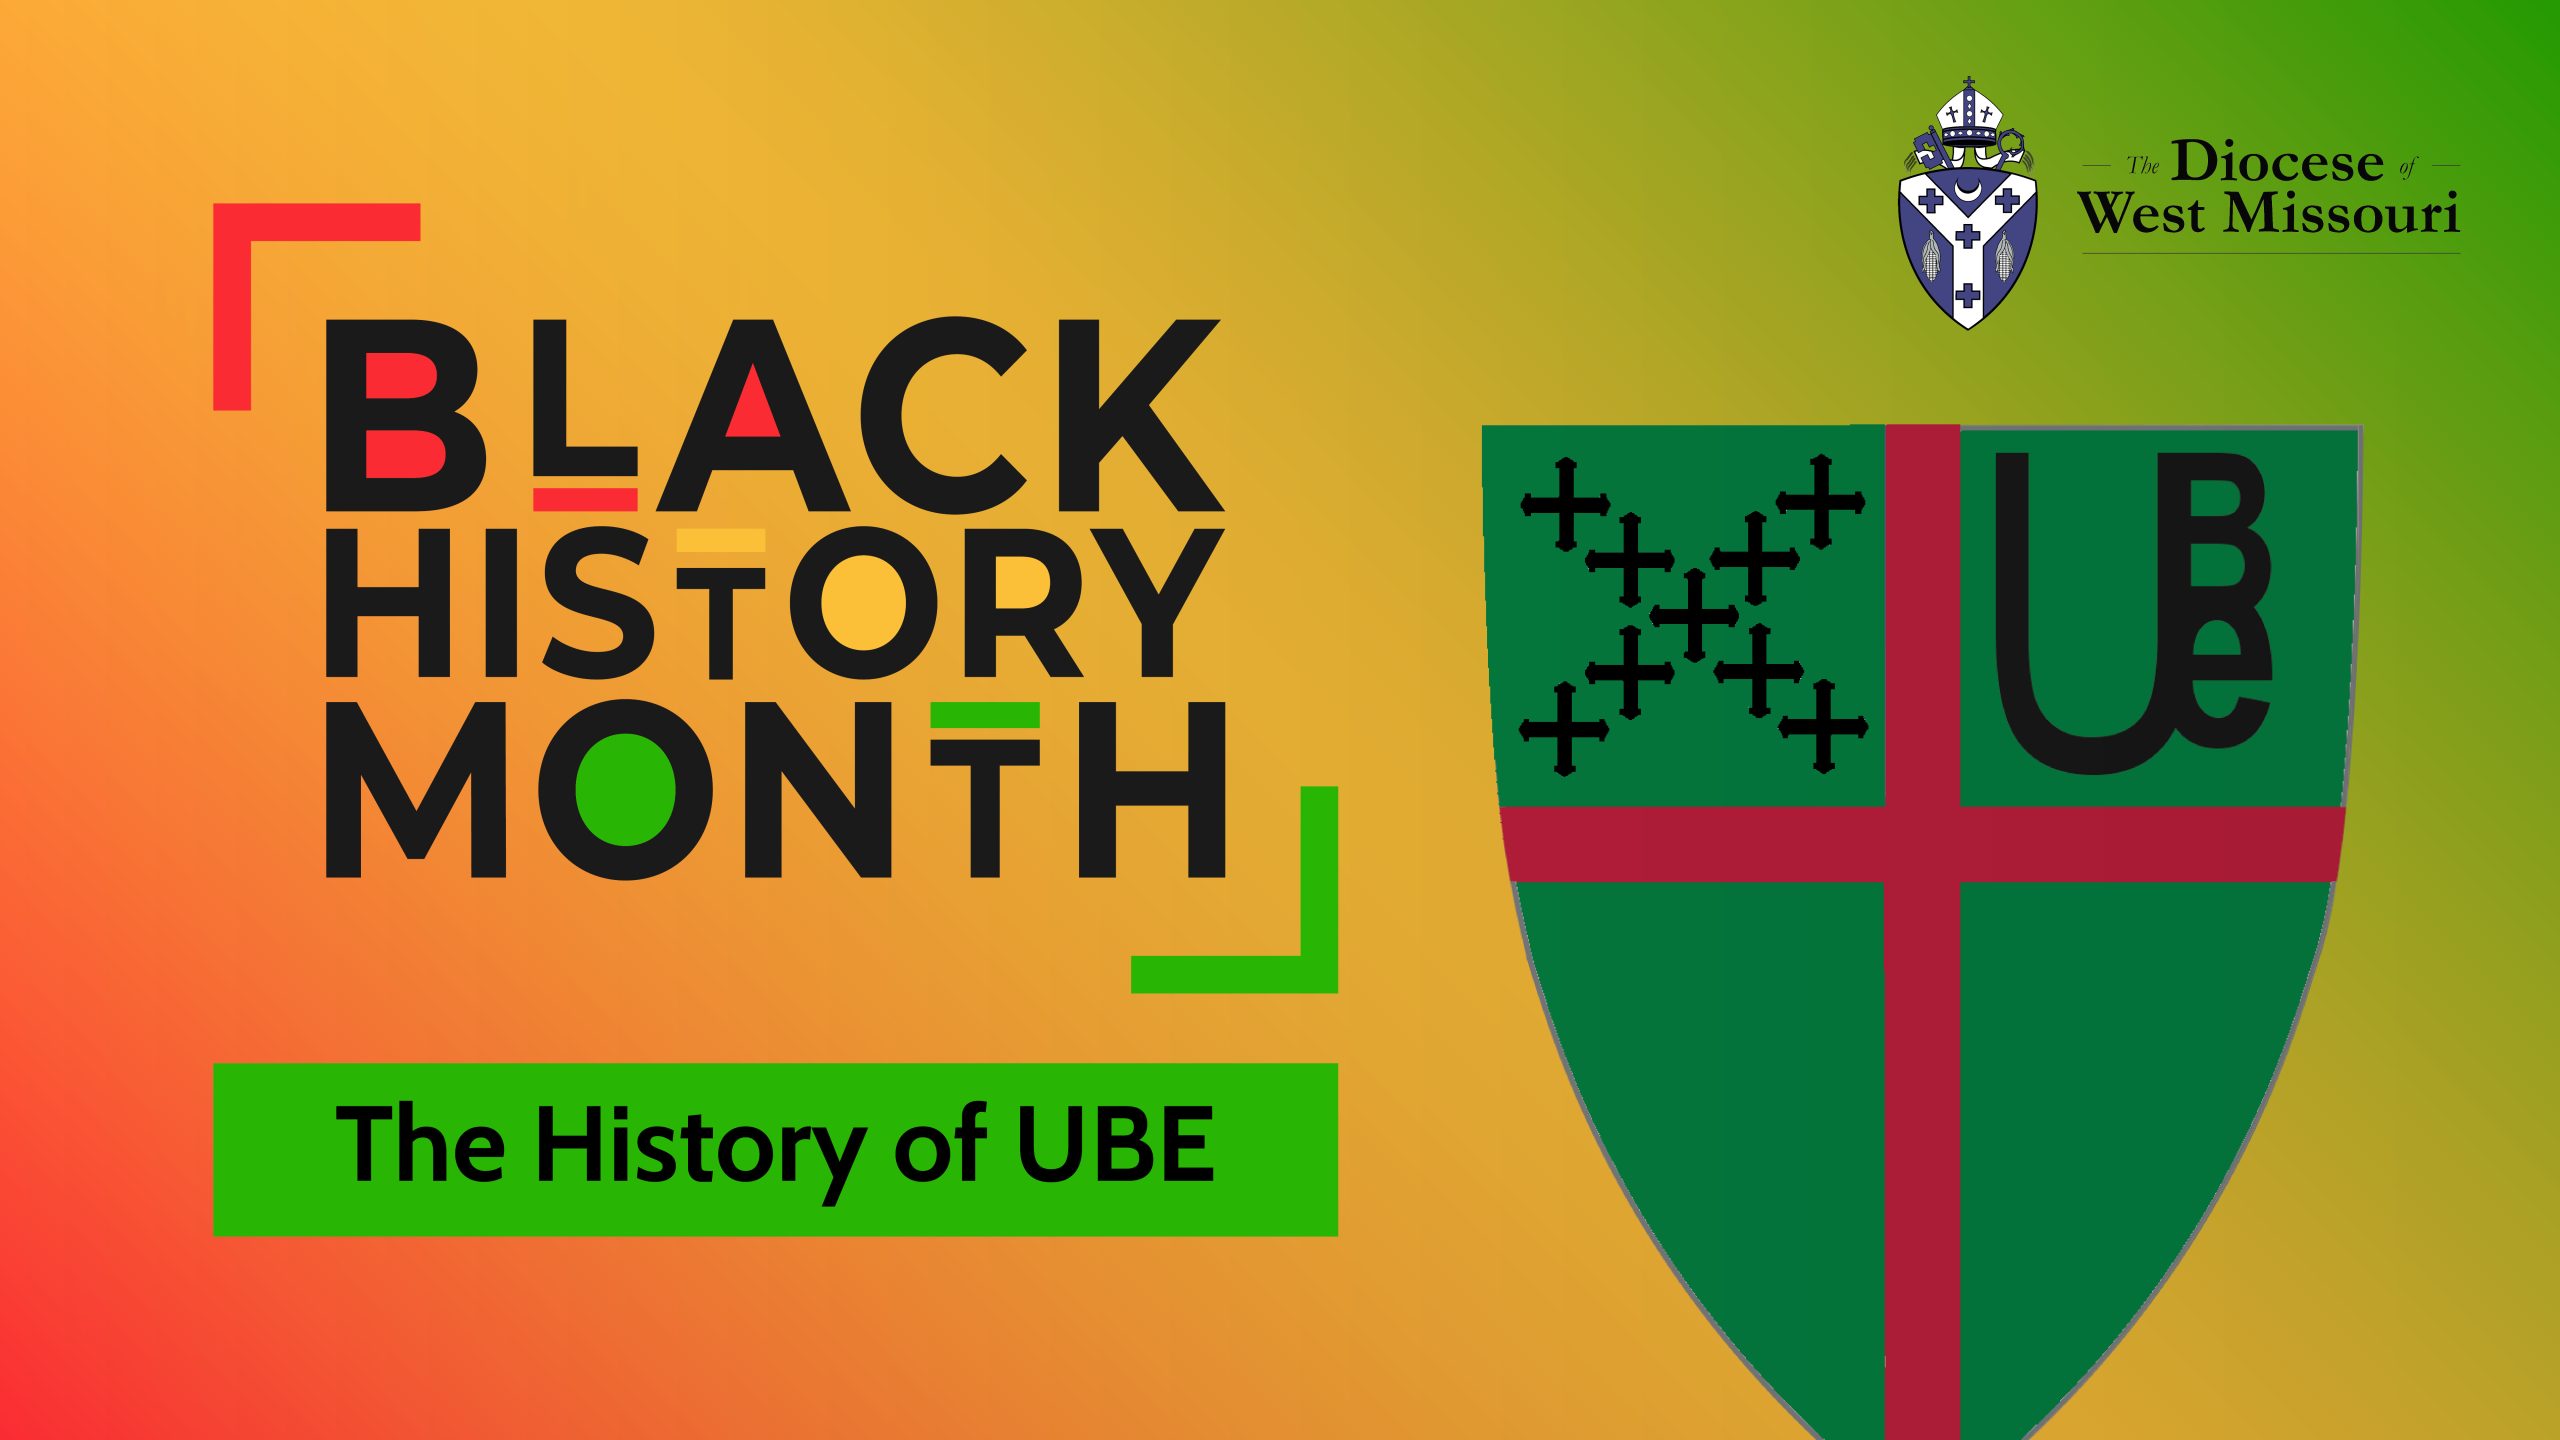 Black History Month: The History of UBE